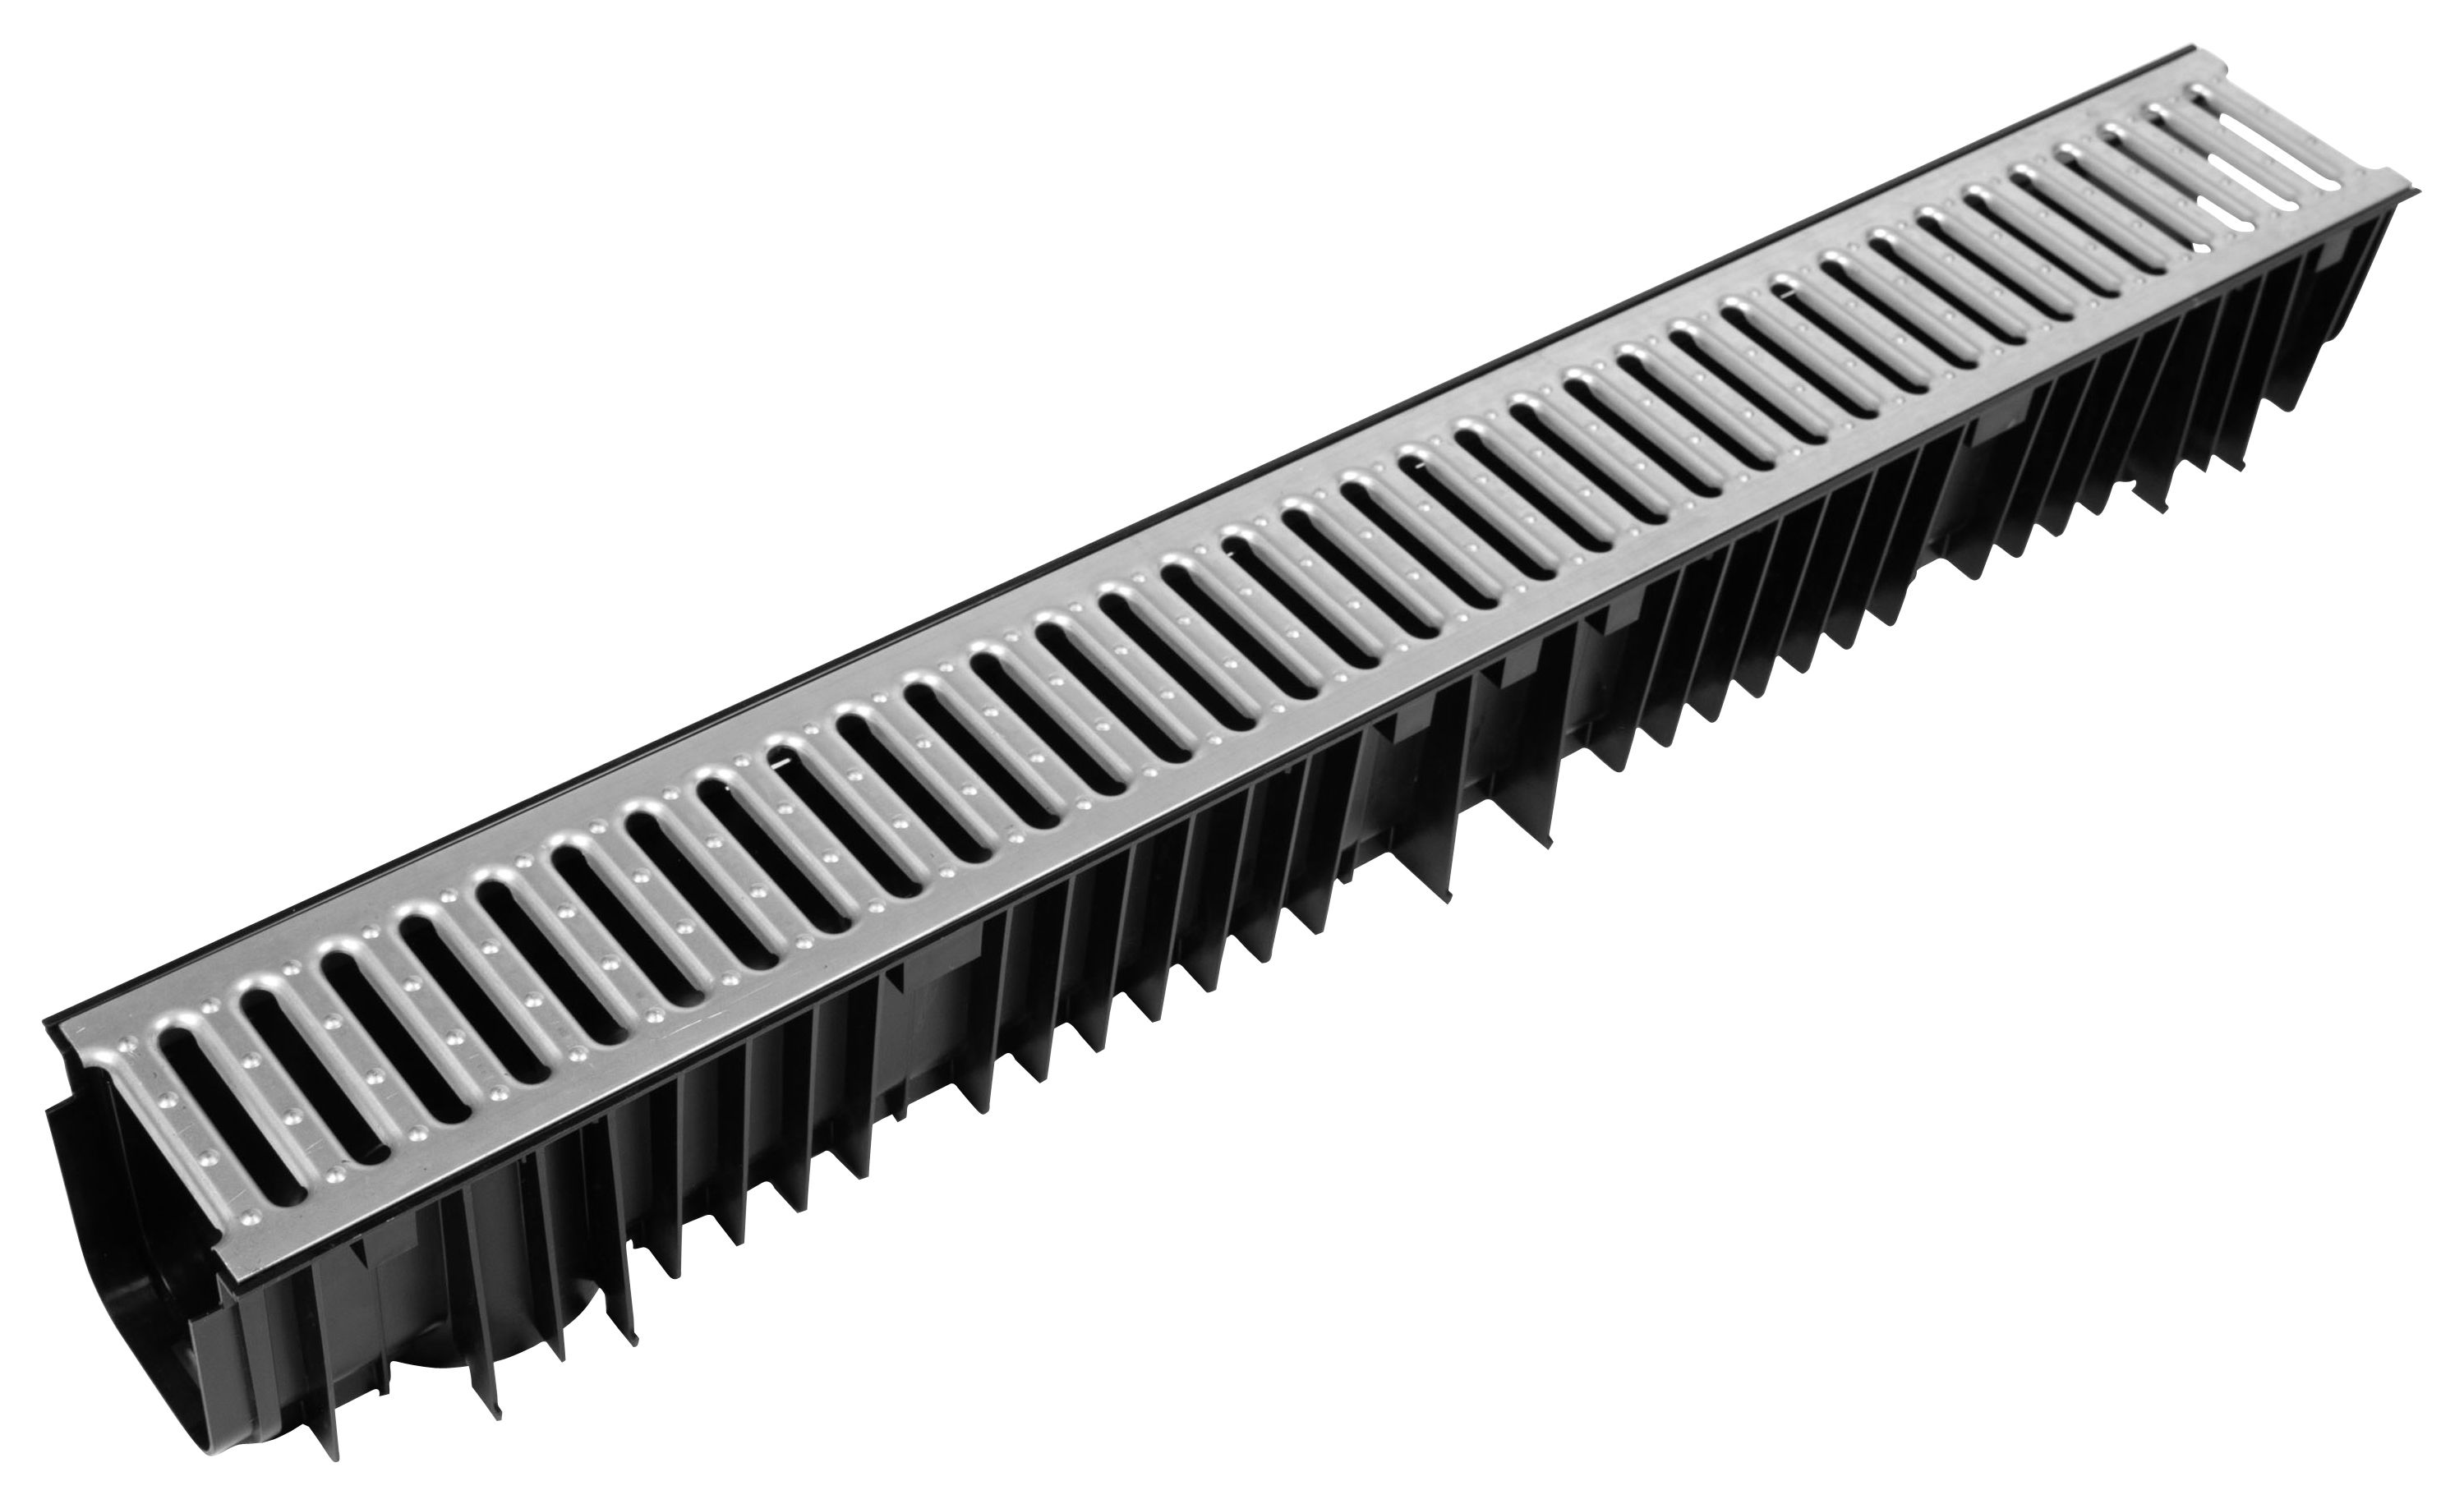 Image of Clark-drain Channel & Galvanised Driveway Drainage Grate - 1m